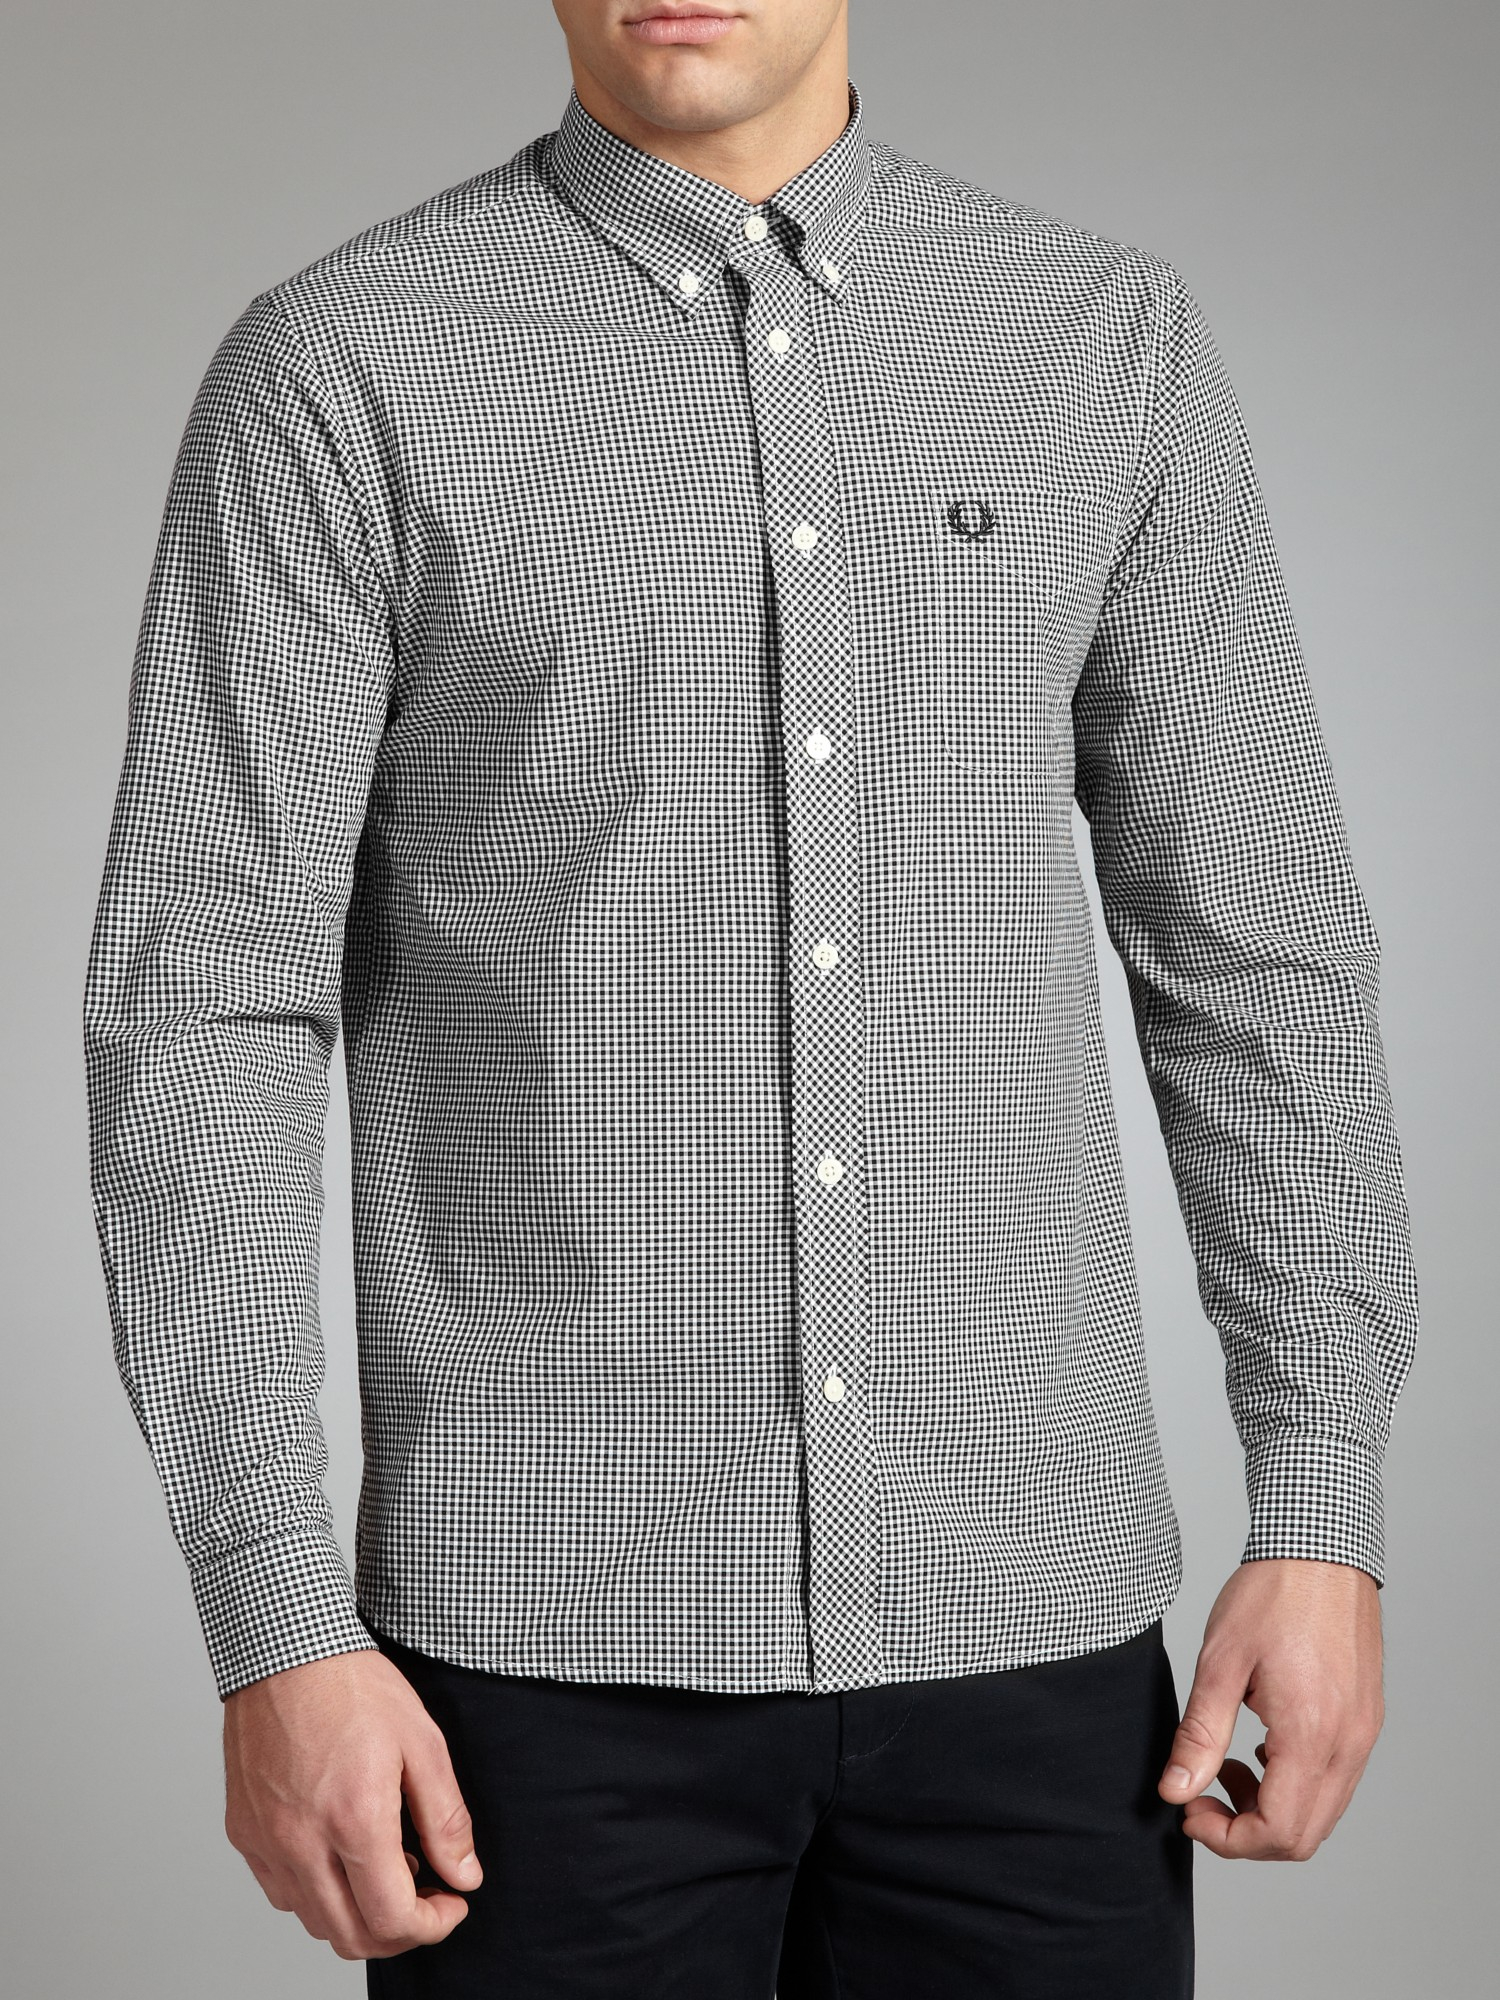 Lyst - Fred perry Gingham Check Shirt in Gray for Men